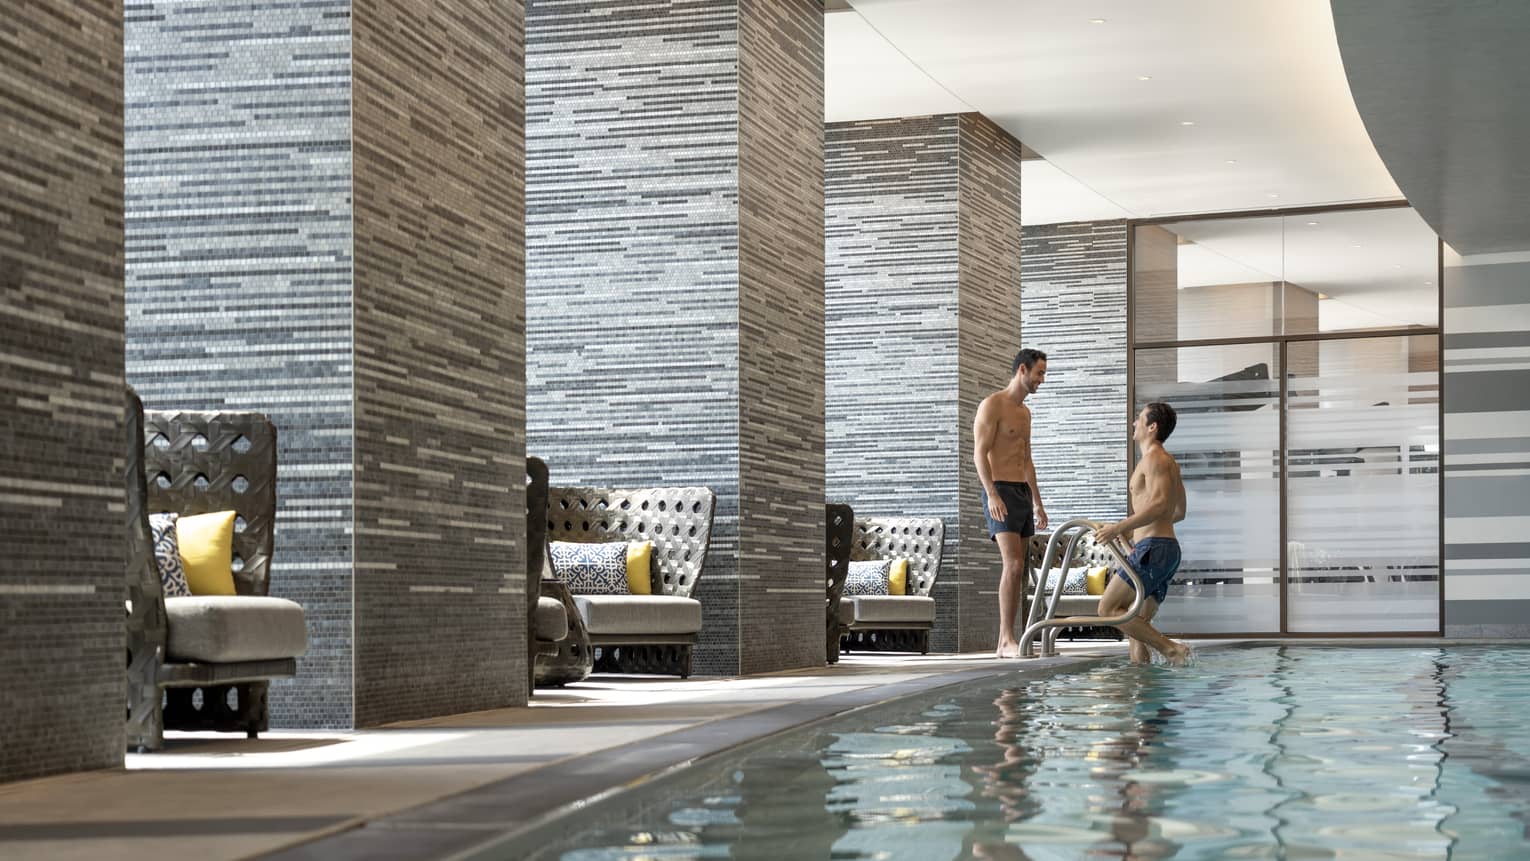 Two men near an indoor pool.